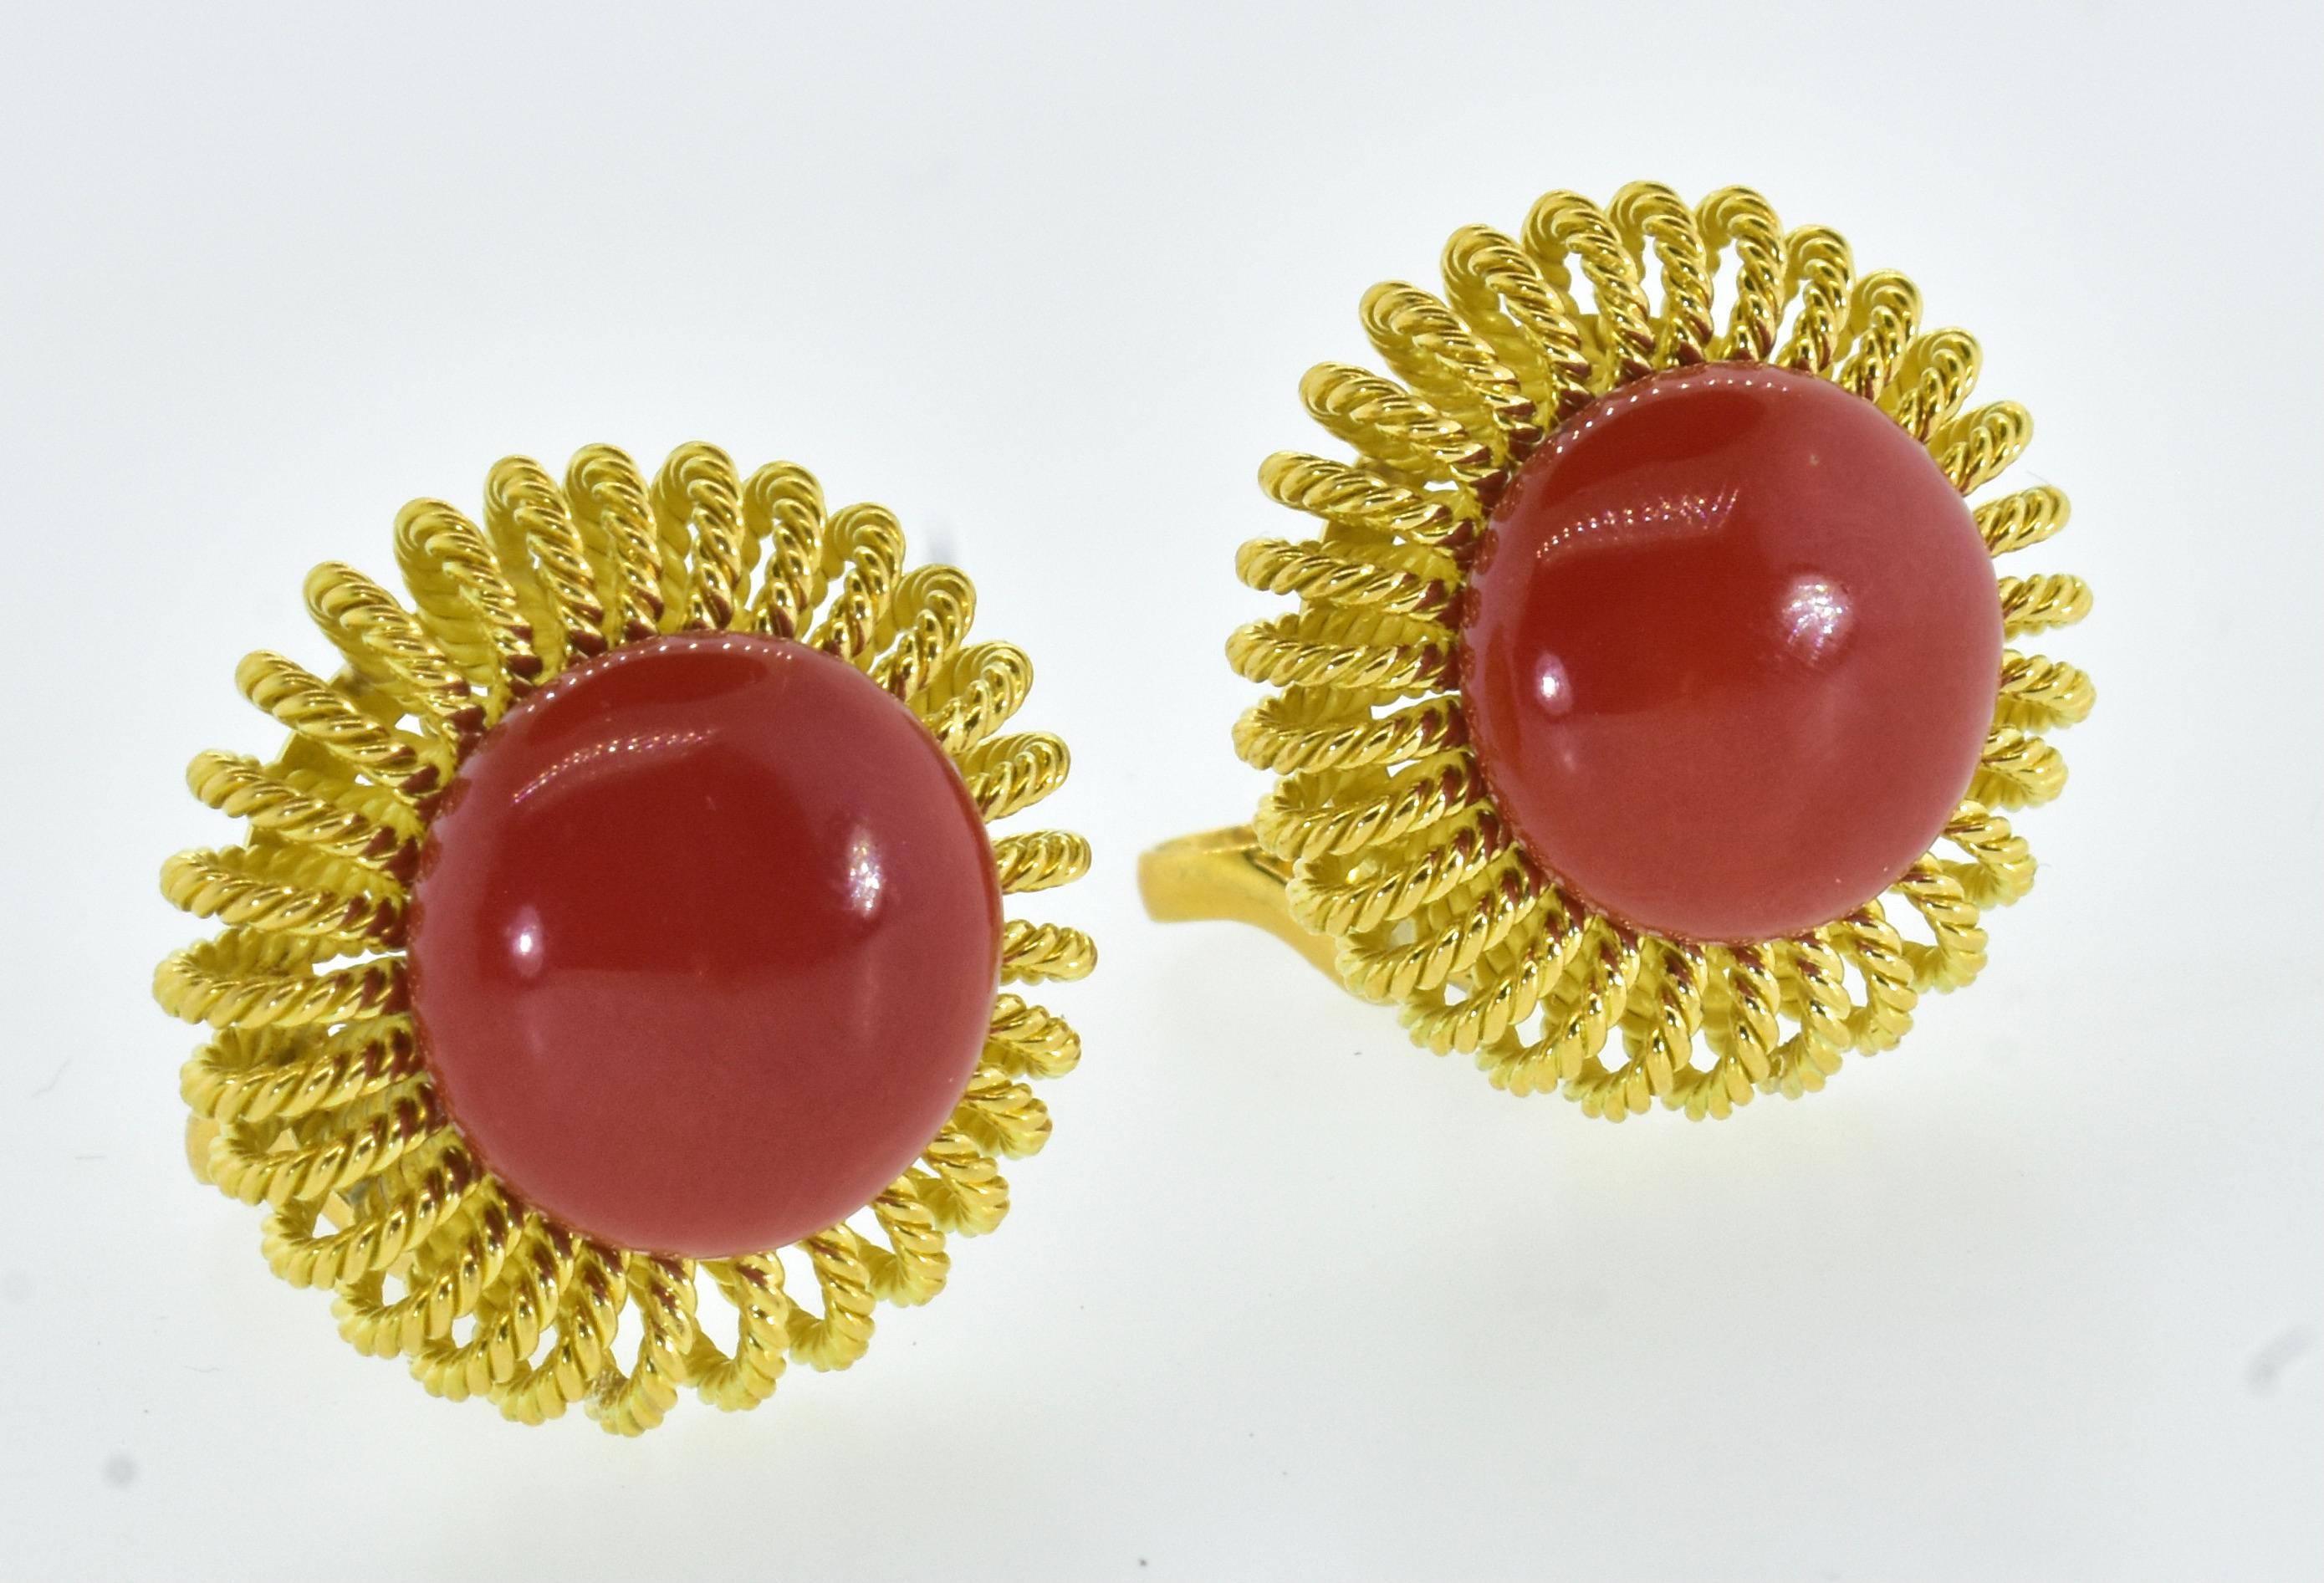 Cabochon 18K Yellow Gold & Red Mediterranean Oxblood Coral Earrings & Ring, C. 1950